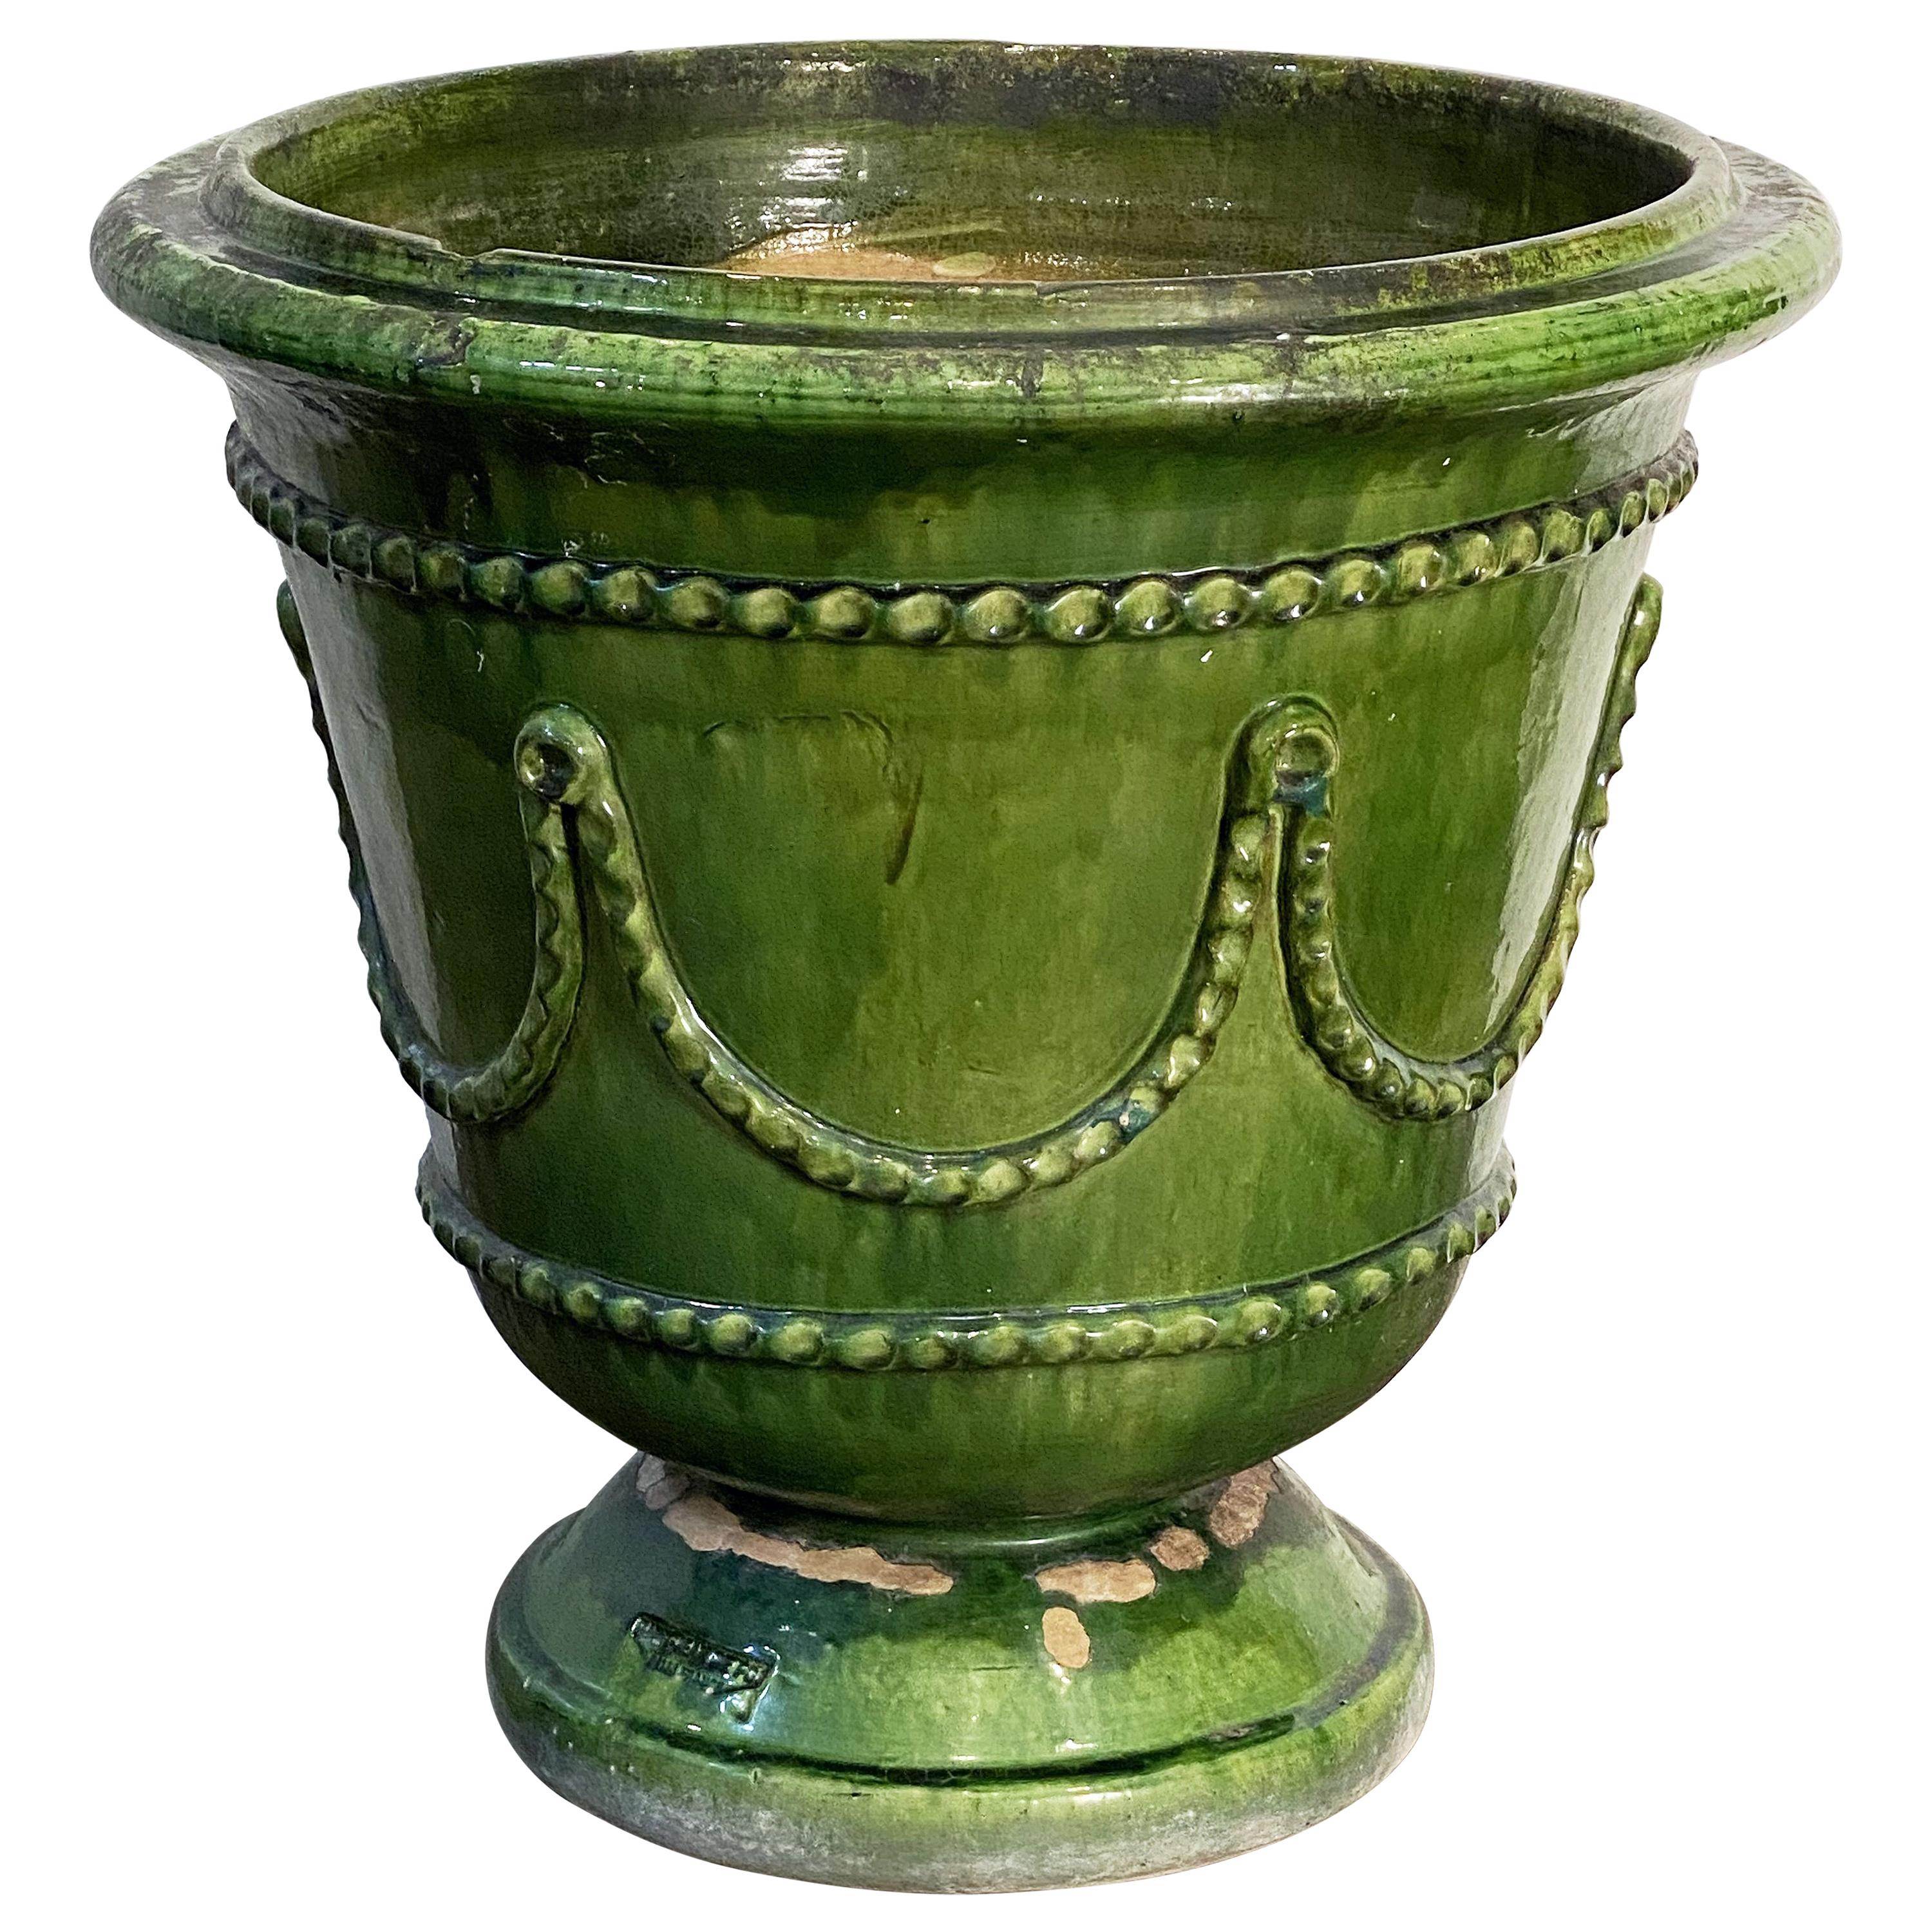 Large Glazed Earthenware Castelnaudary-Style Urn or Planter Pot from France